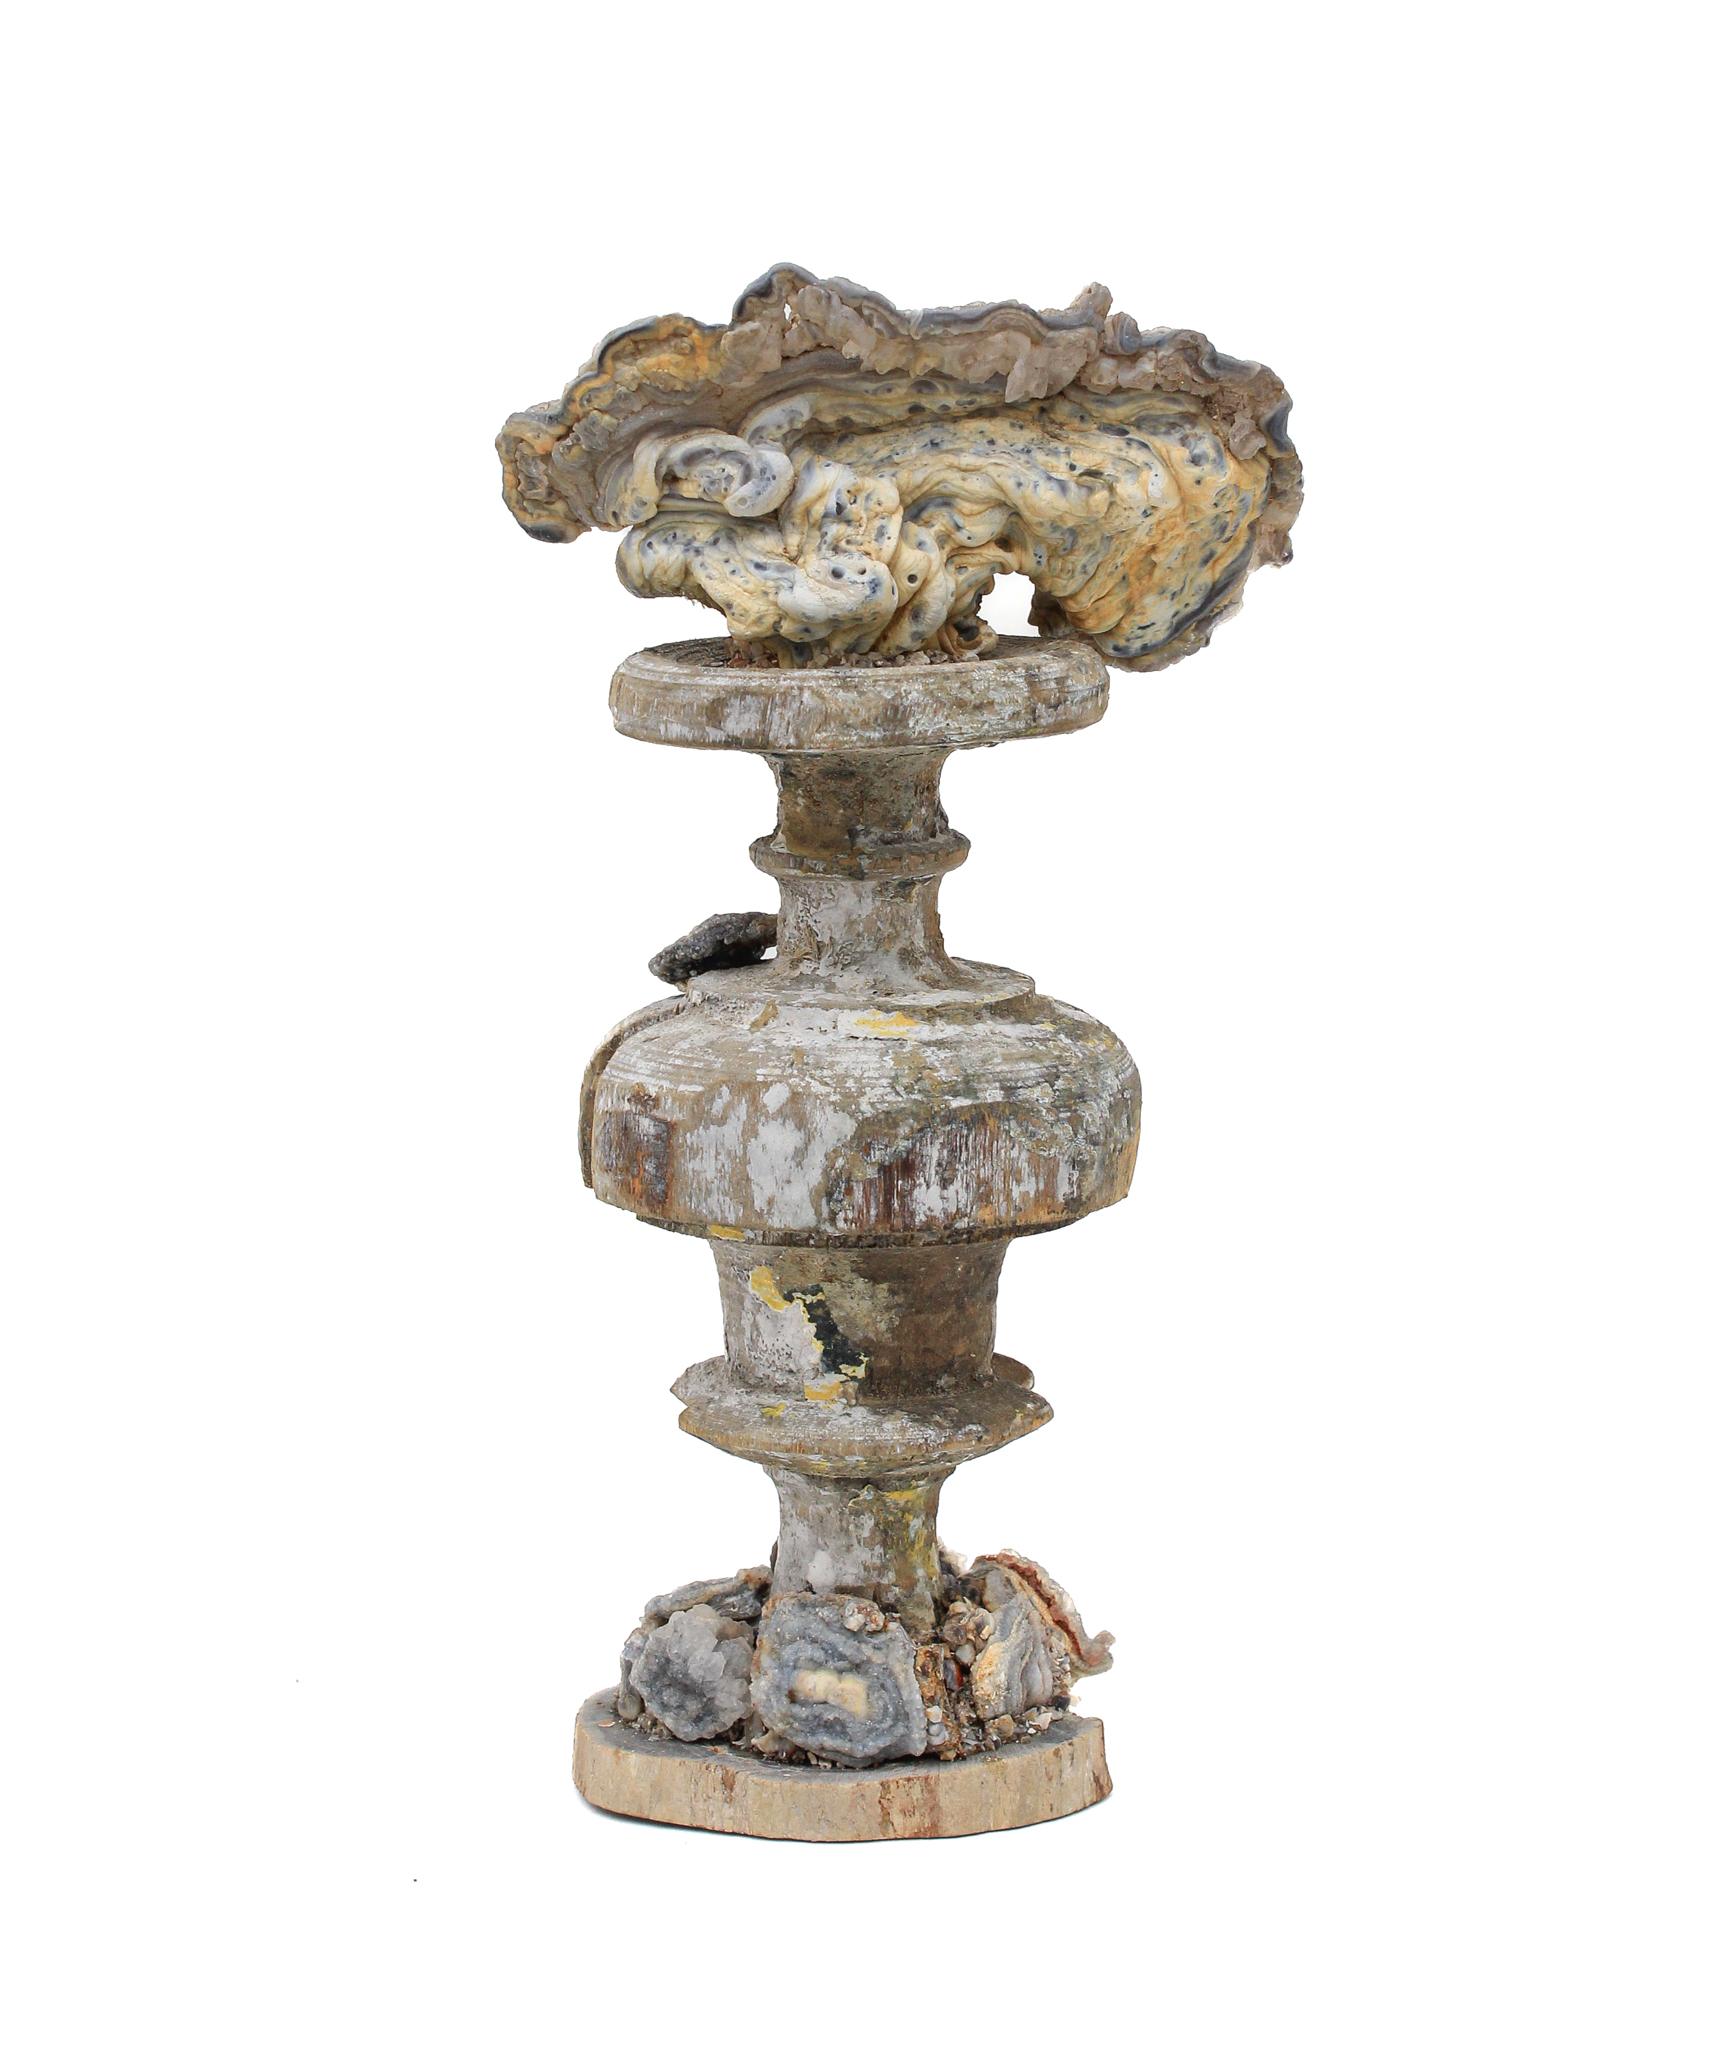 17th century Italian vase mounted and encrusted with chalcedony rosettes on a petrified wood base.

This fragment is from a church in Florence. It was found and saved from the historic Florence Flood of 1966. This was one of the worst floods